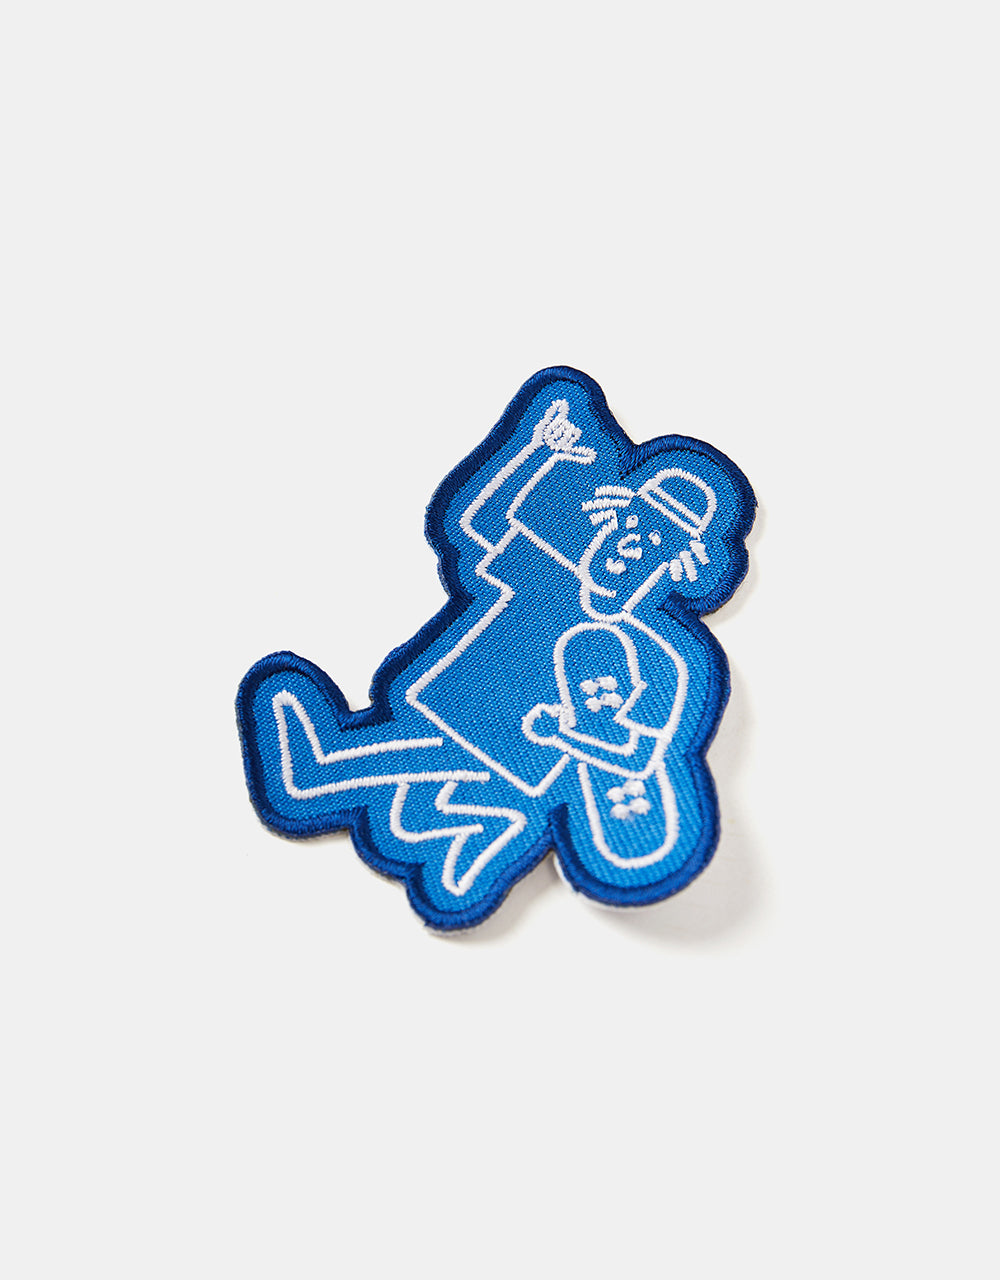 Route One Blue Skater Embroidered Patch - Blue